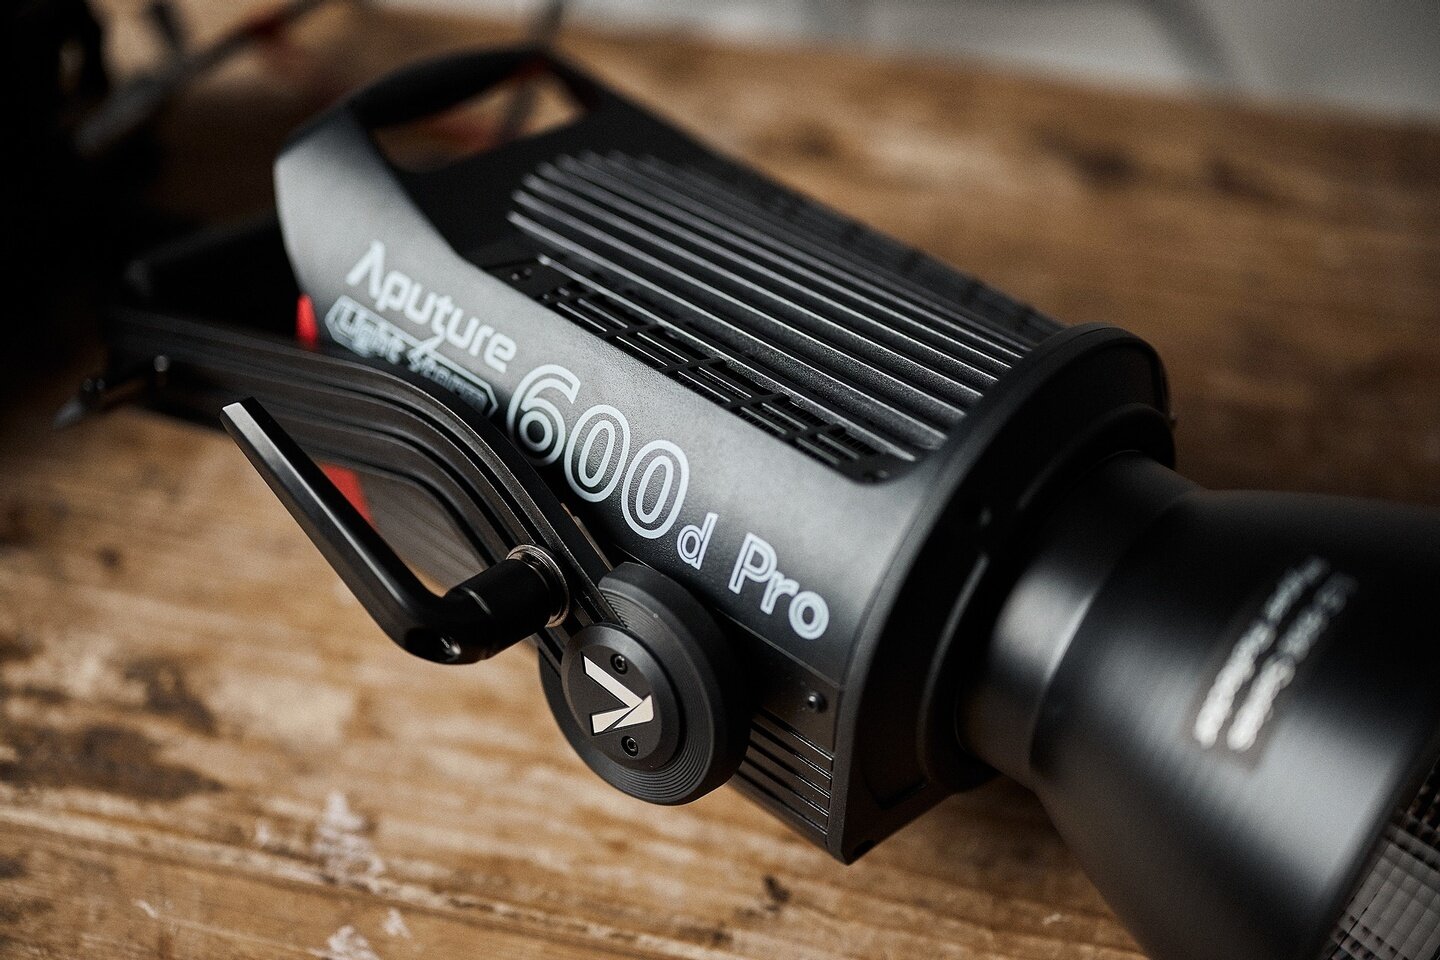 For this weeks #FixtureFocus we're taking a look at the @aputure.lighting Light Storm 600d Pro COB LED. Despite the name being a bit of a mouthful, Aputure's next evolution from the very popular 300d is a formidable piece of kit. This point source li